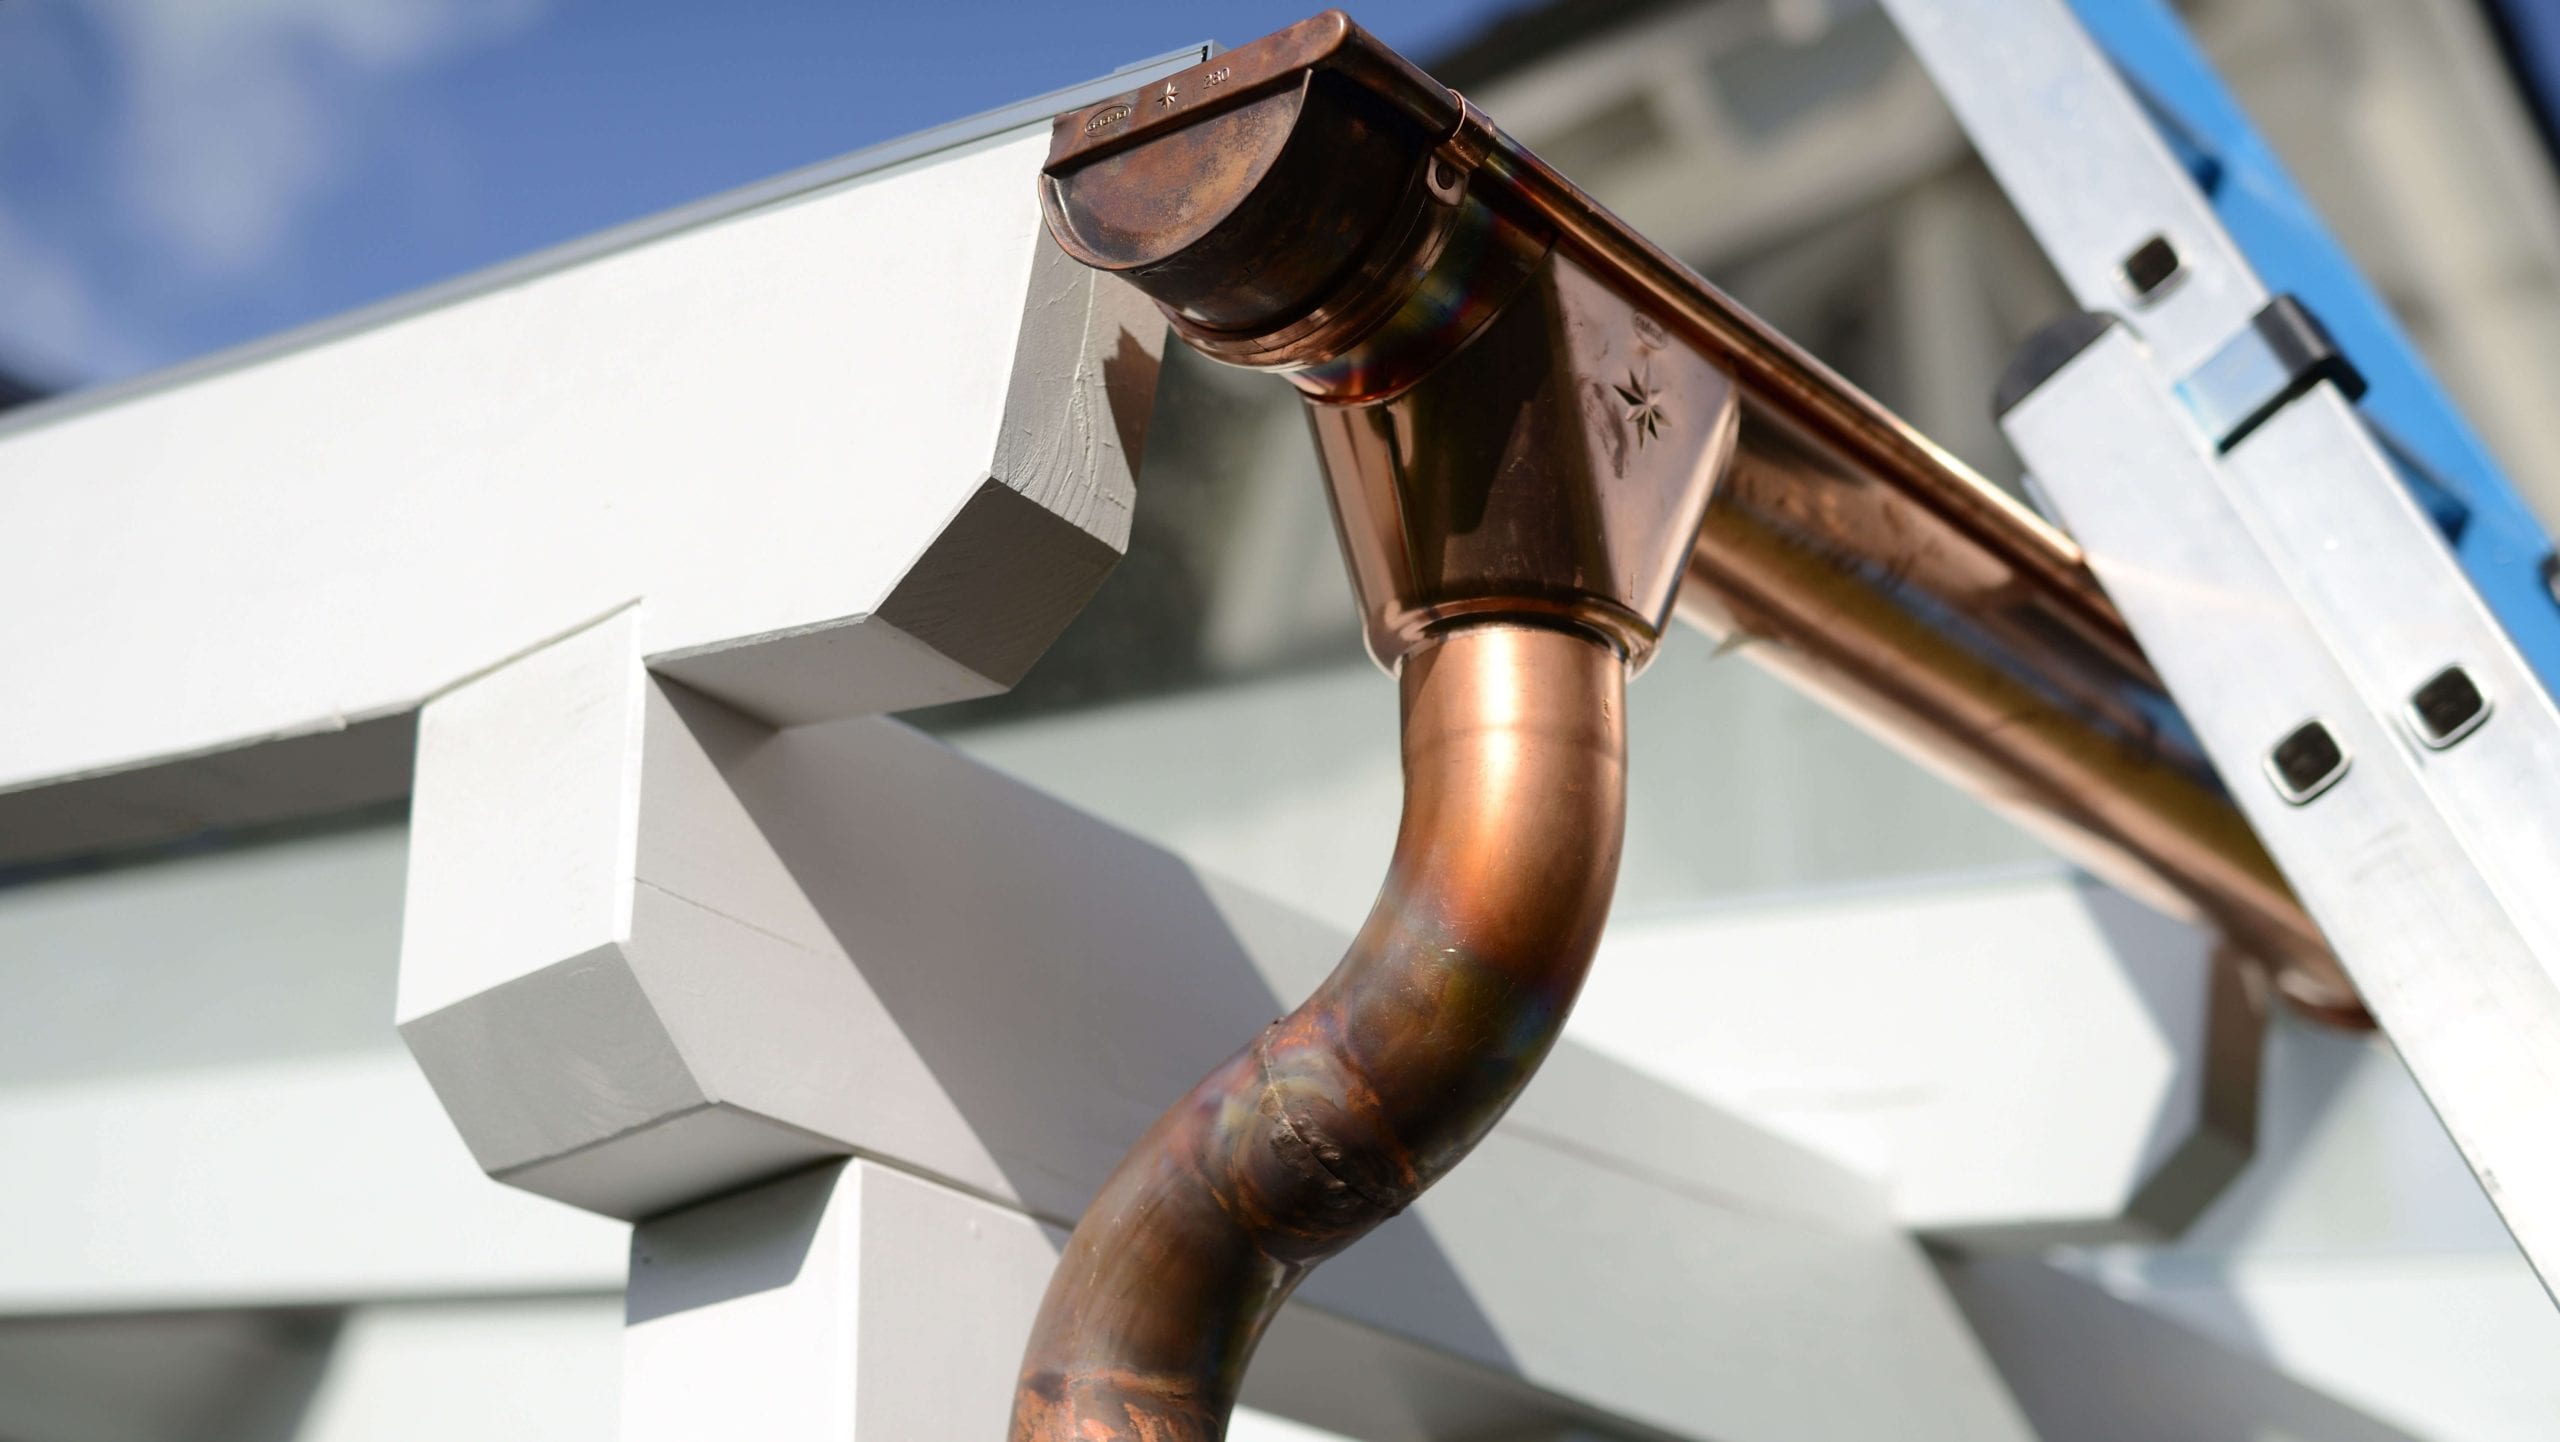 Make your property stand out with copper gutters. Contact for gutter installation in Overland Park